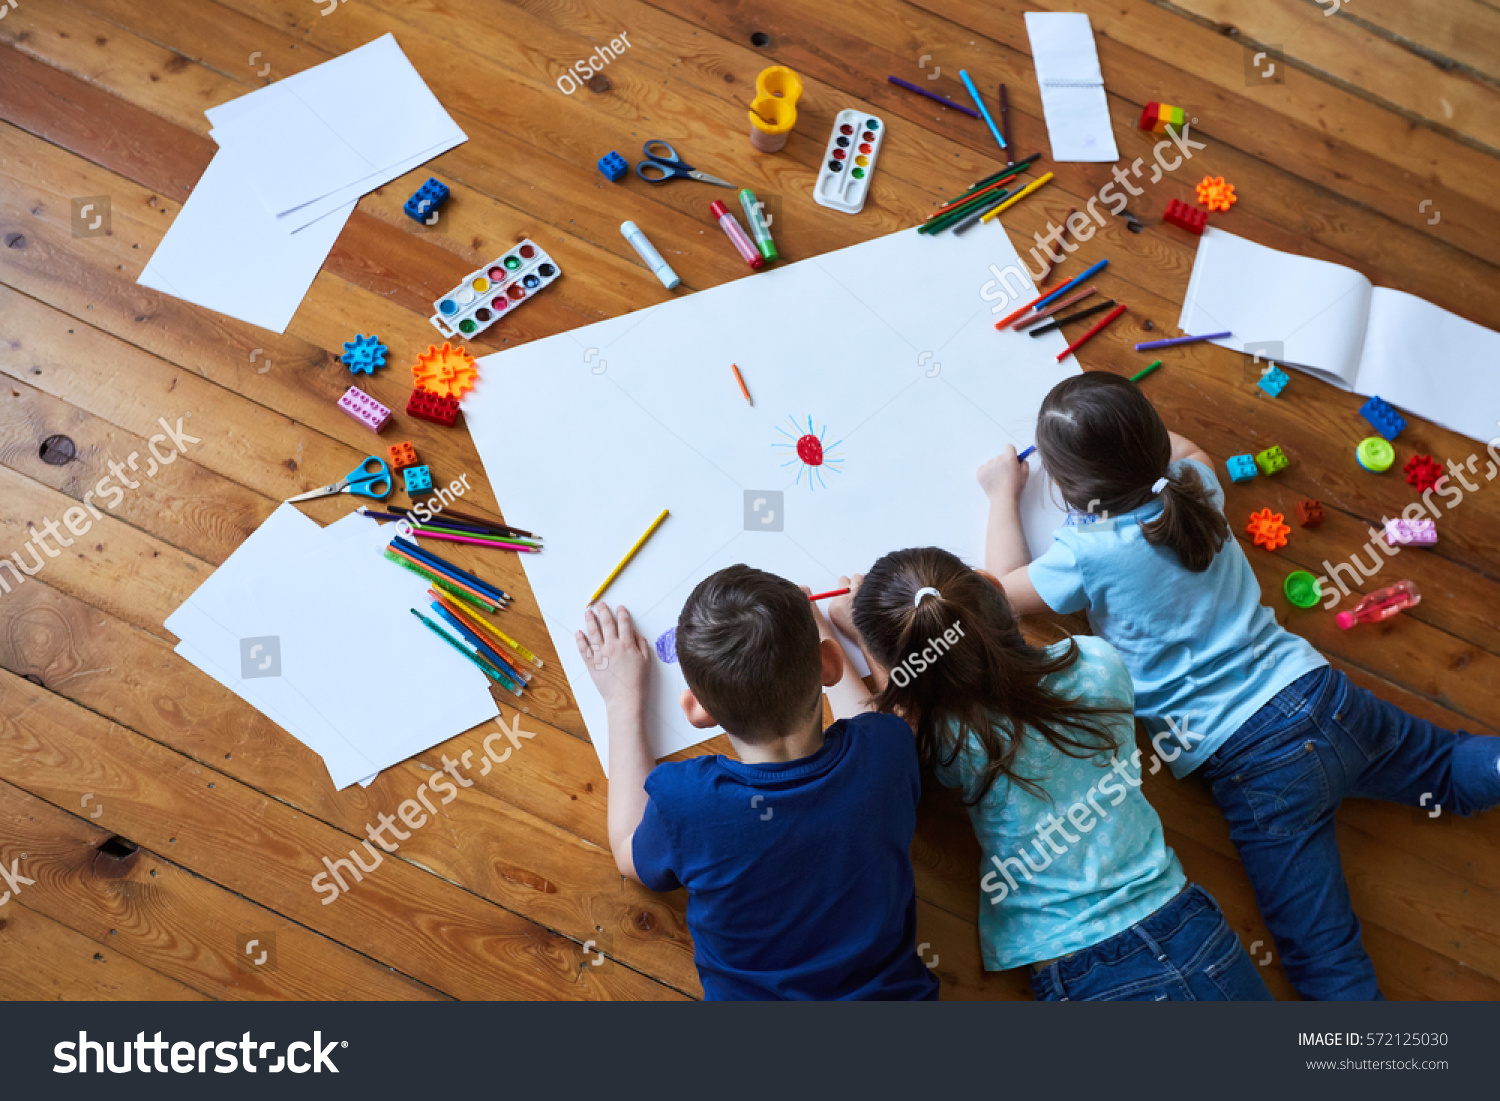 Children Draw Together On Large Sheet Stock Photo (Edit Now) 572125030